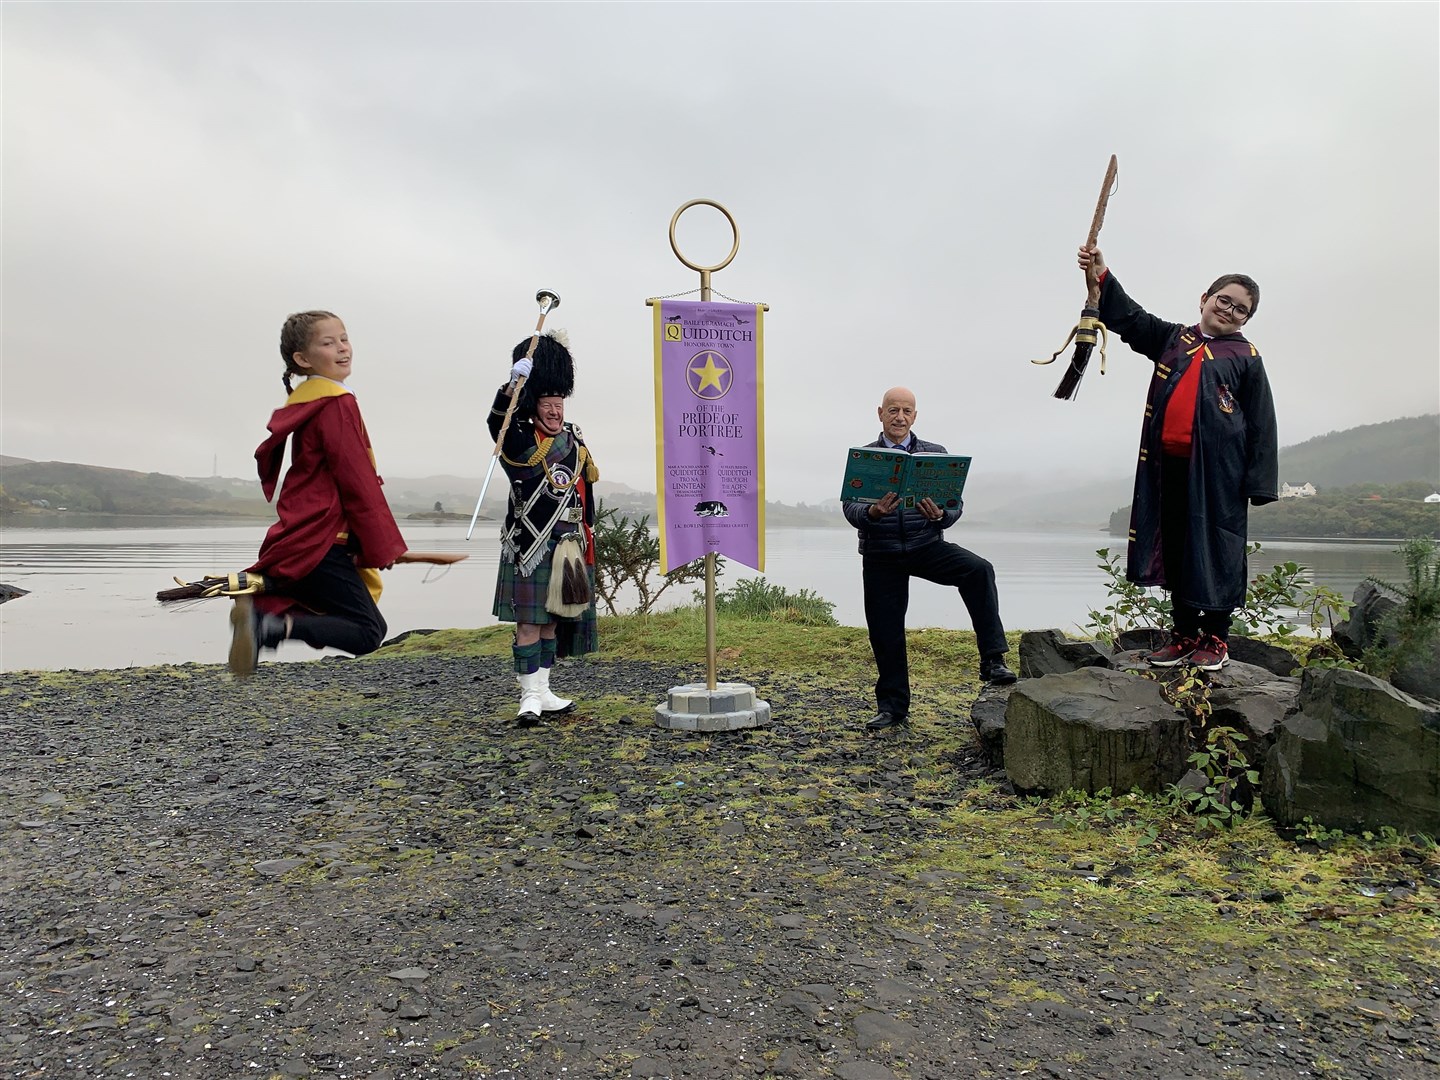 Portree celebrates Honorary Quidditch Town status.